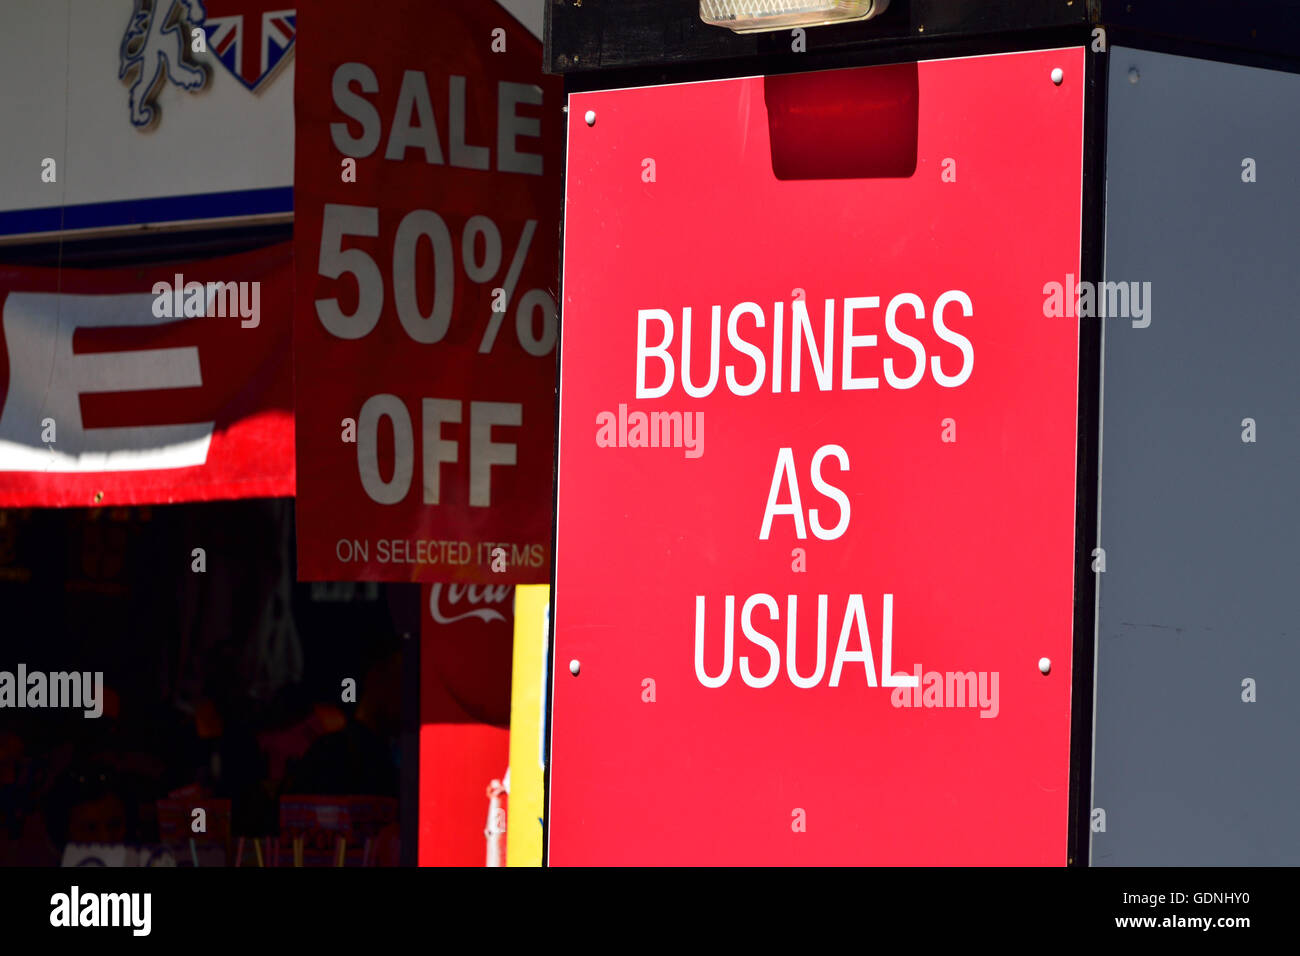 London, England, UK. Business as Usual sign outside a shop Stock Photo